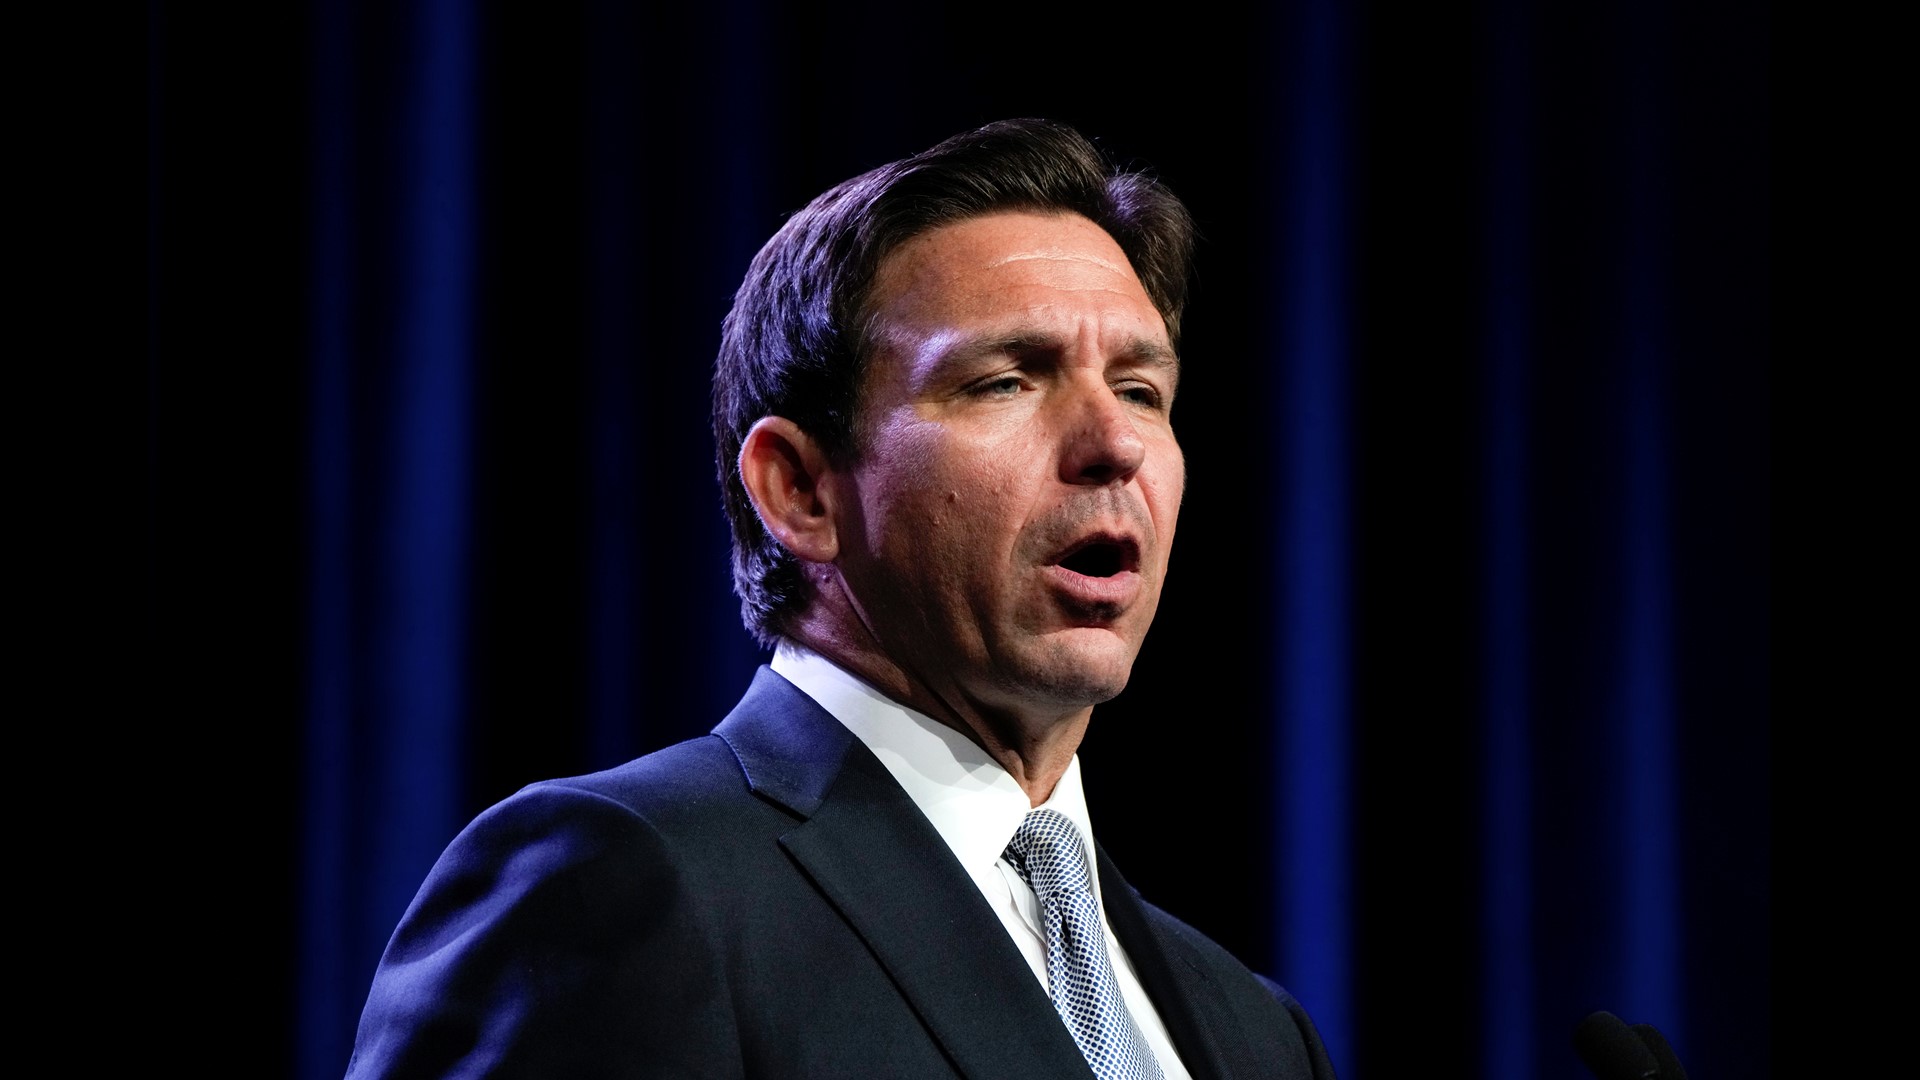 Donald Trump, Ron DeSantis and a dozen other Republican presidential hopefuls attended the Iowa Republican Party fundraiser at the Iowa Events Center on Friday.